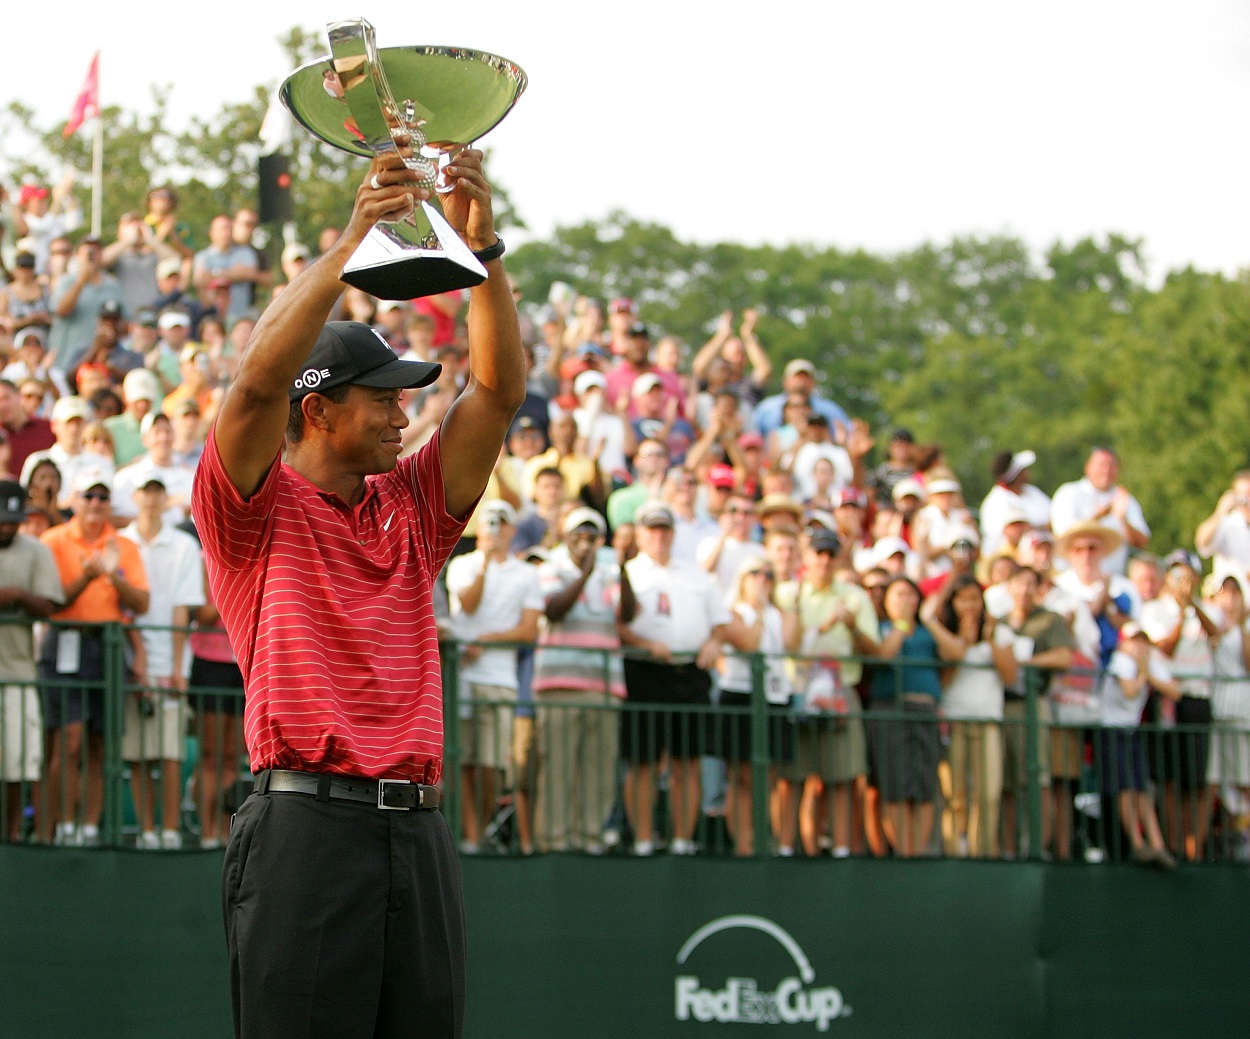 Tiger Woods celebrates after winning the 2007 PGA Tour FedEx Cup title